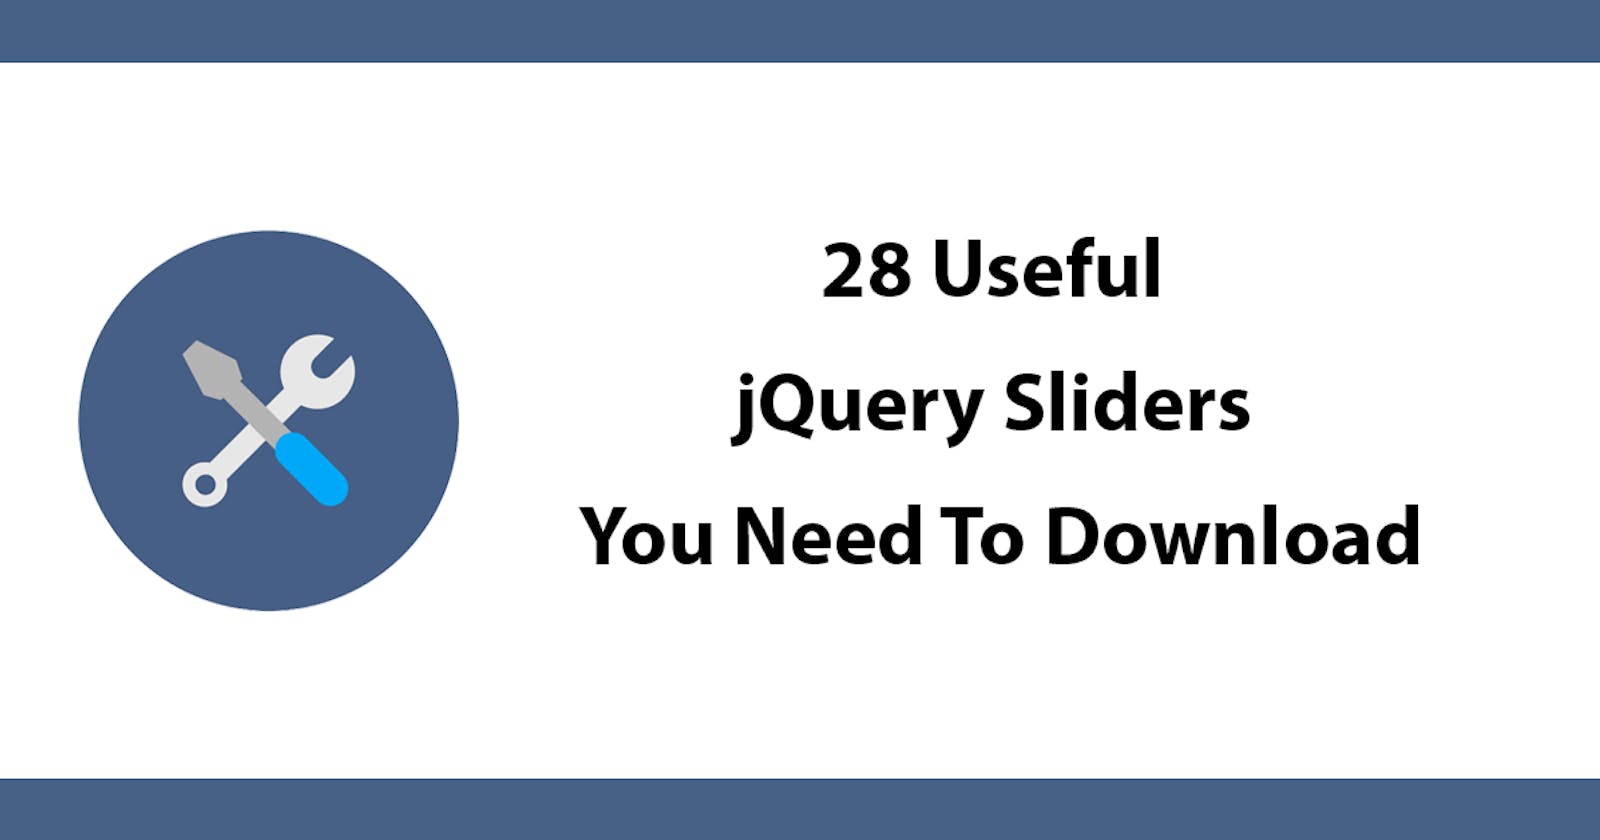 28 Useful JQuery Sliders You Need To Download